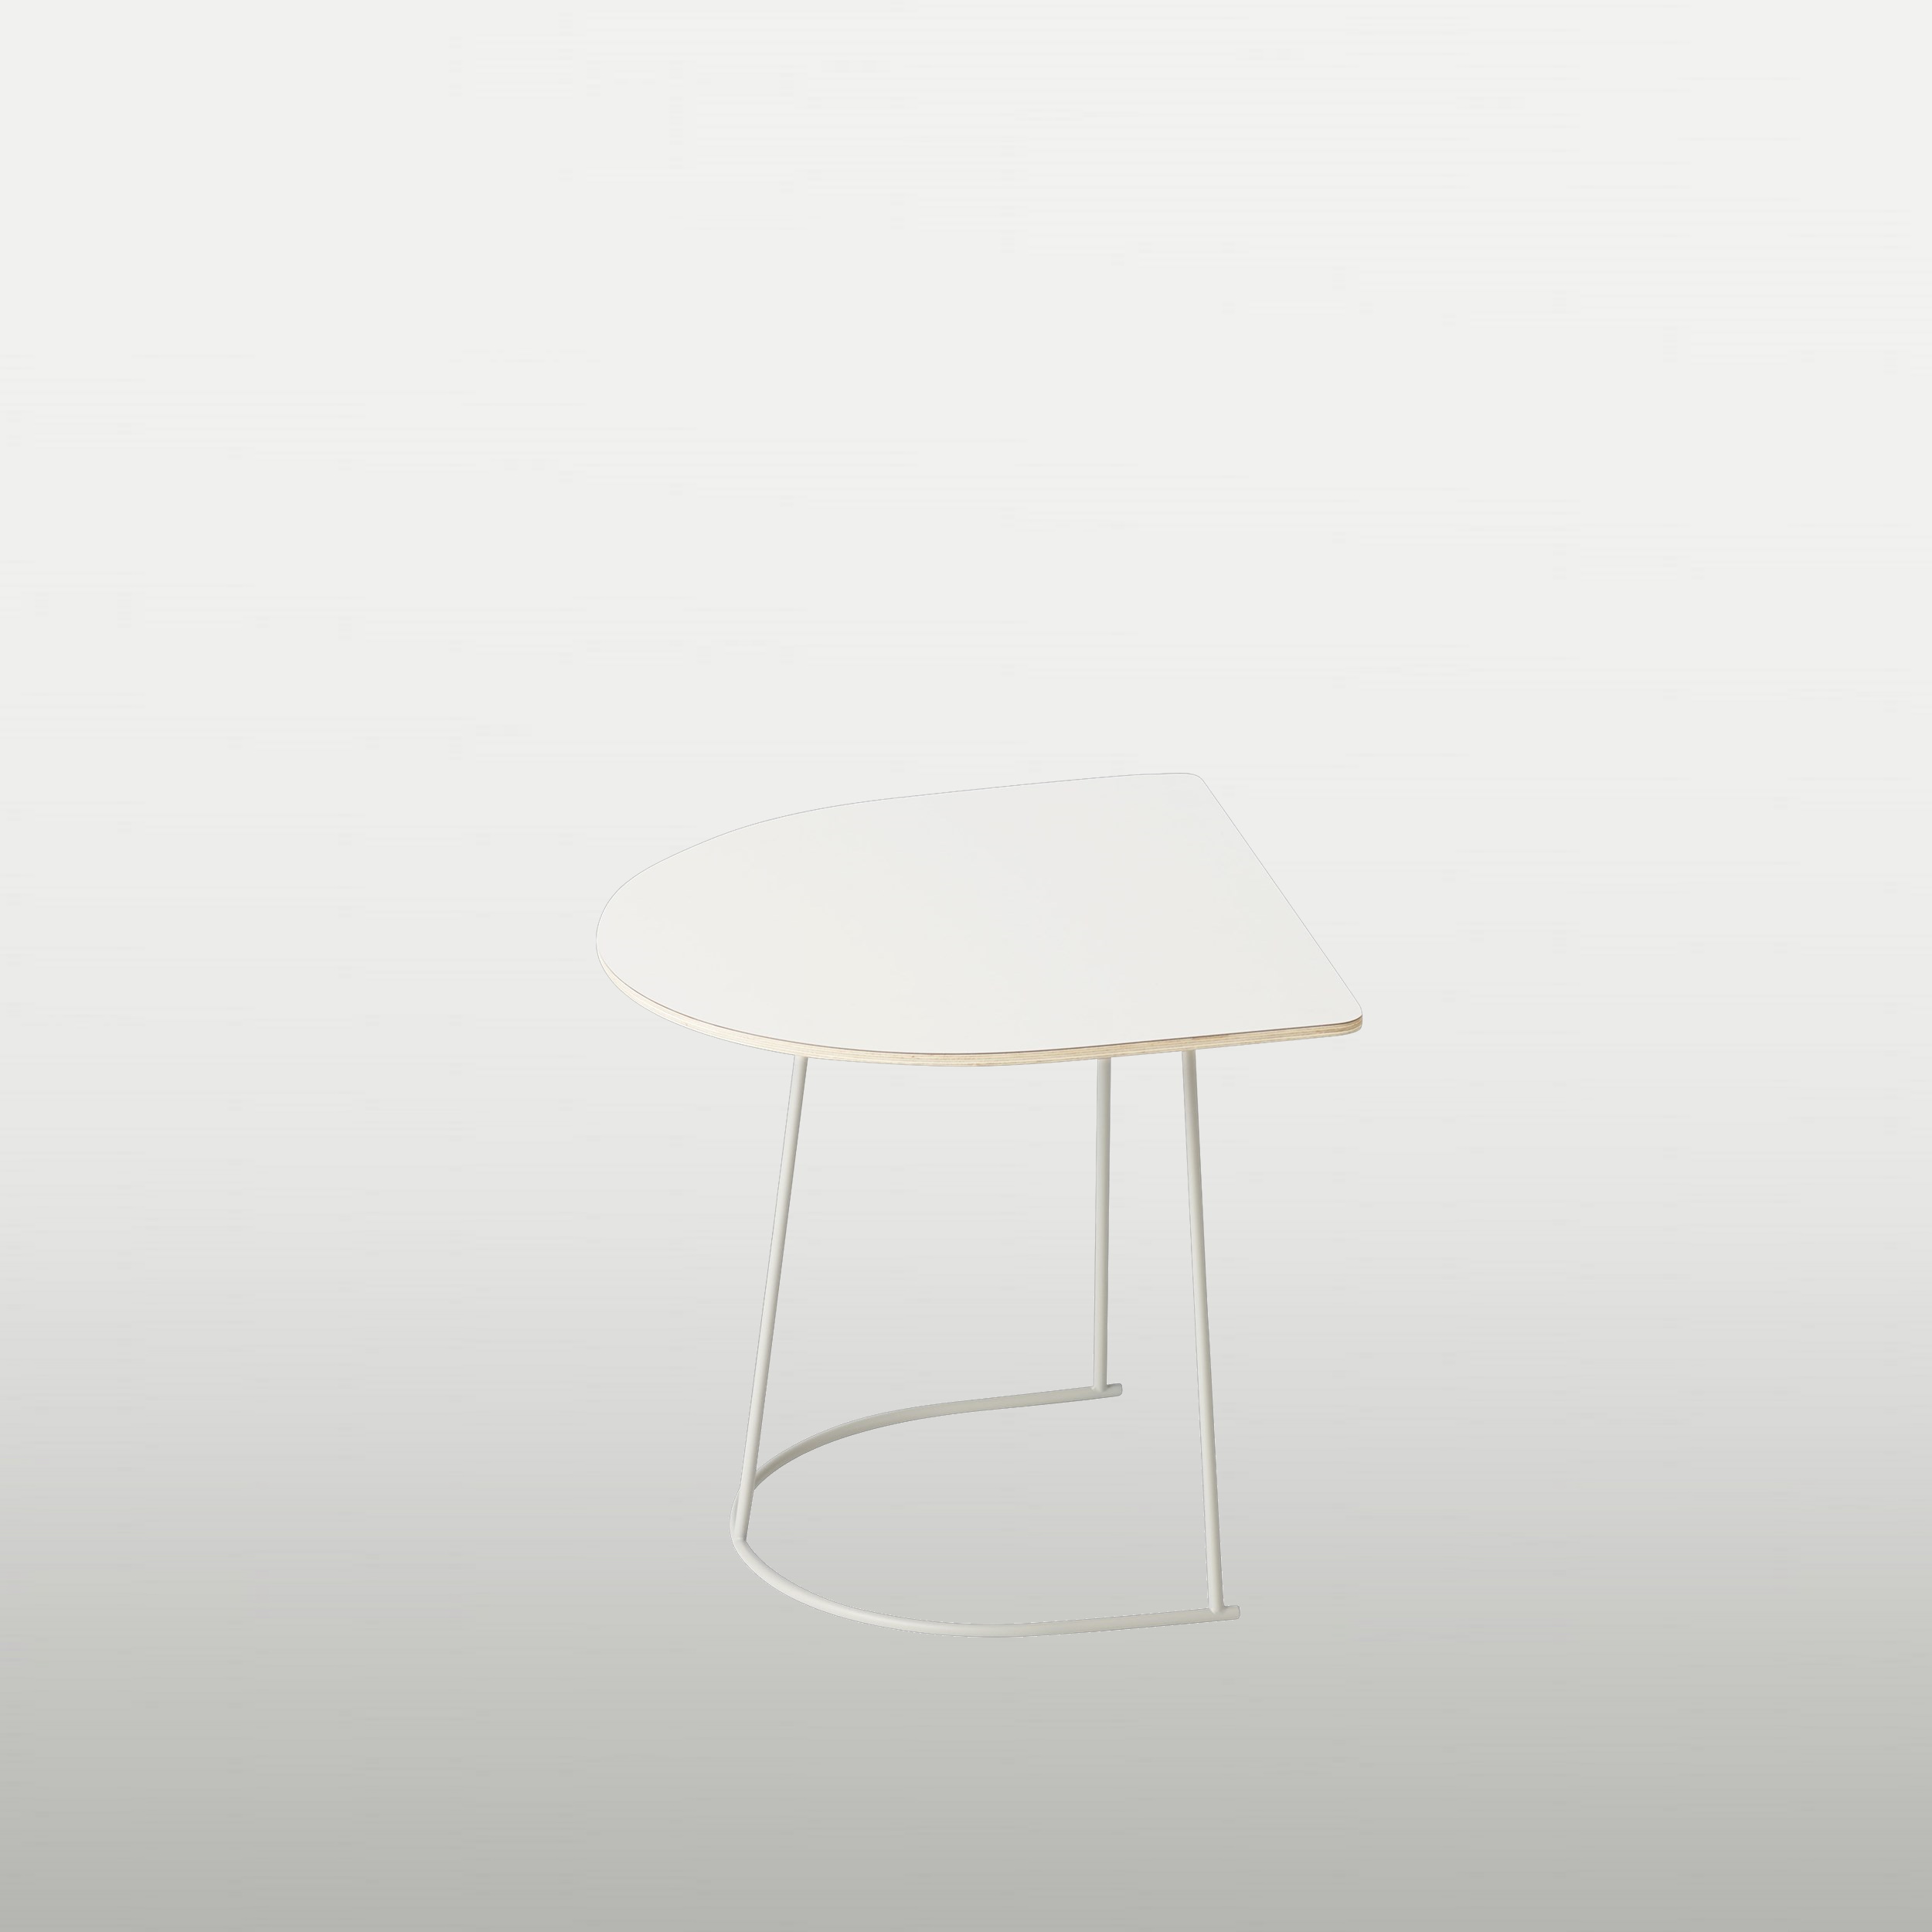 Lounge table Airy -half size, white